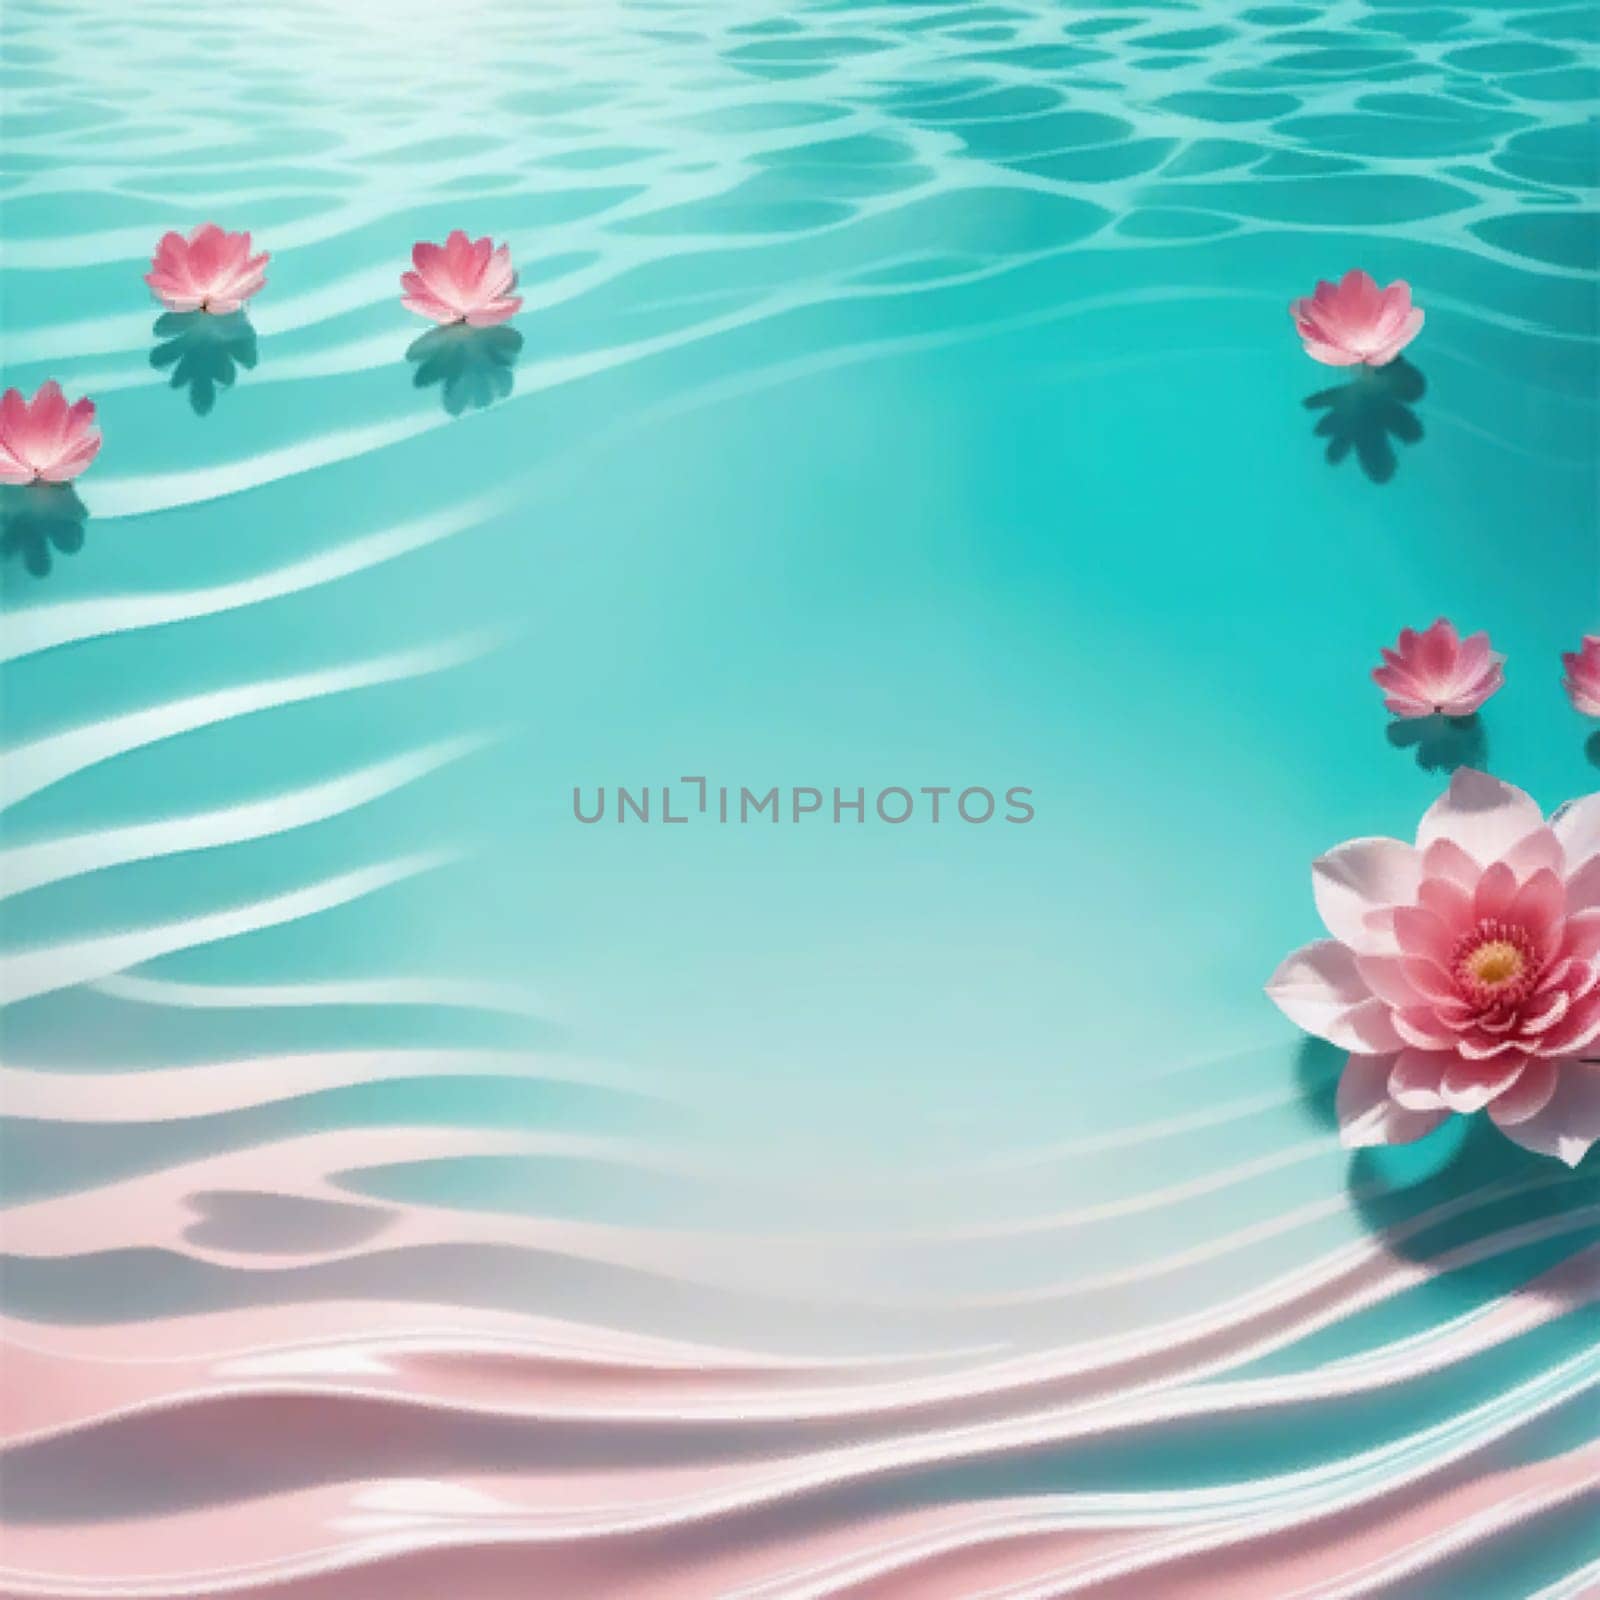 Pink flowers lilies and buds floating on blue surface water with rings by EkaterinaPereslavtseva